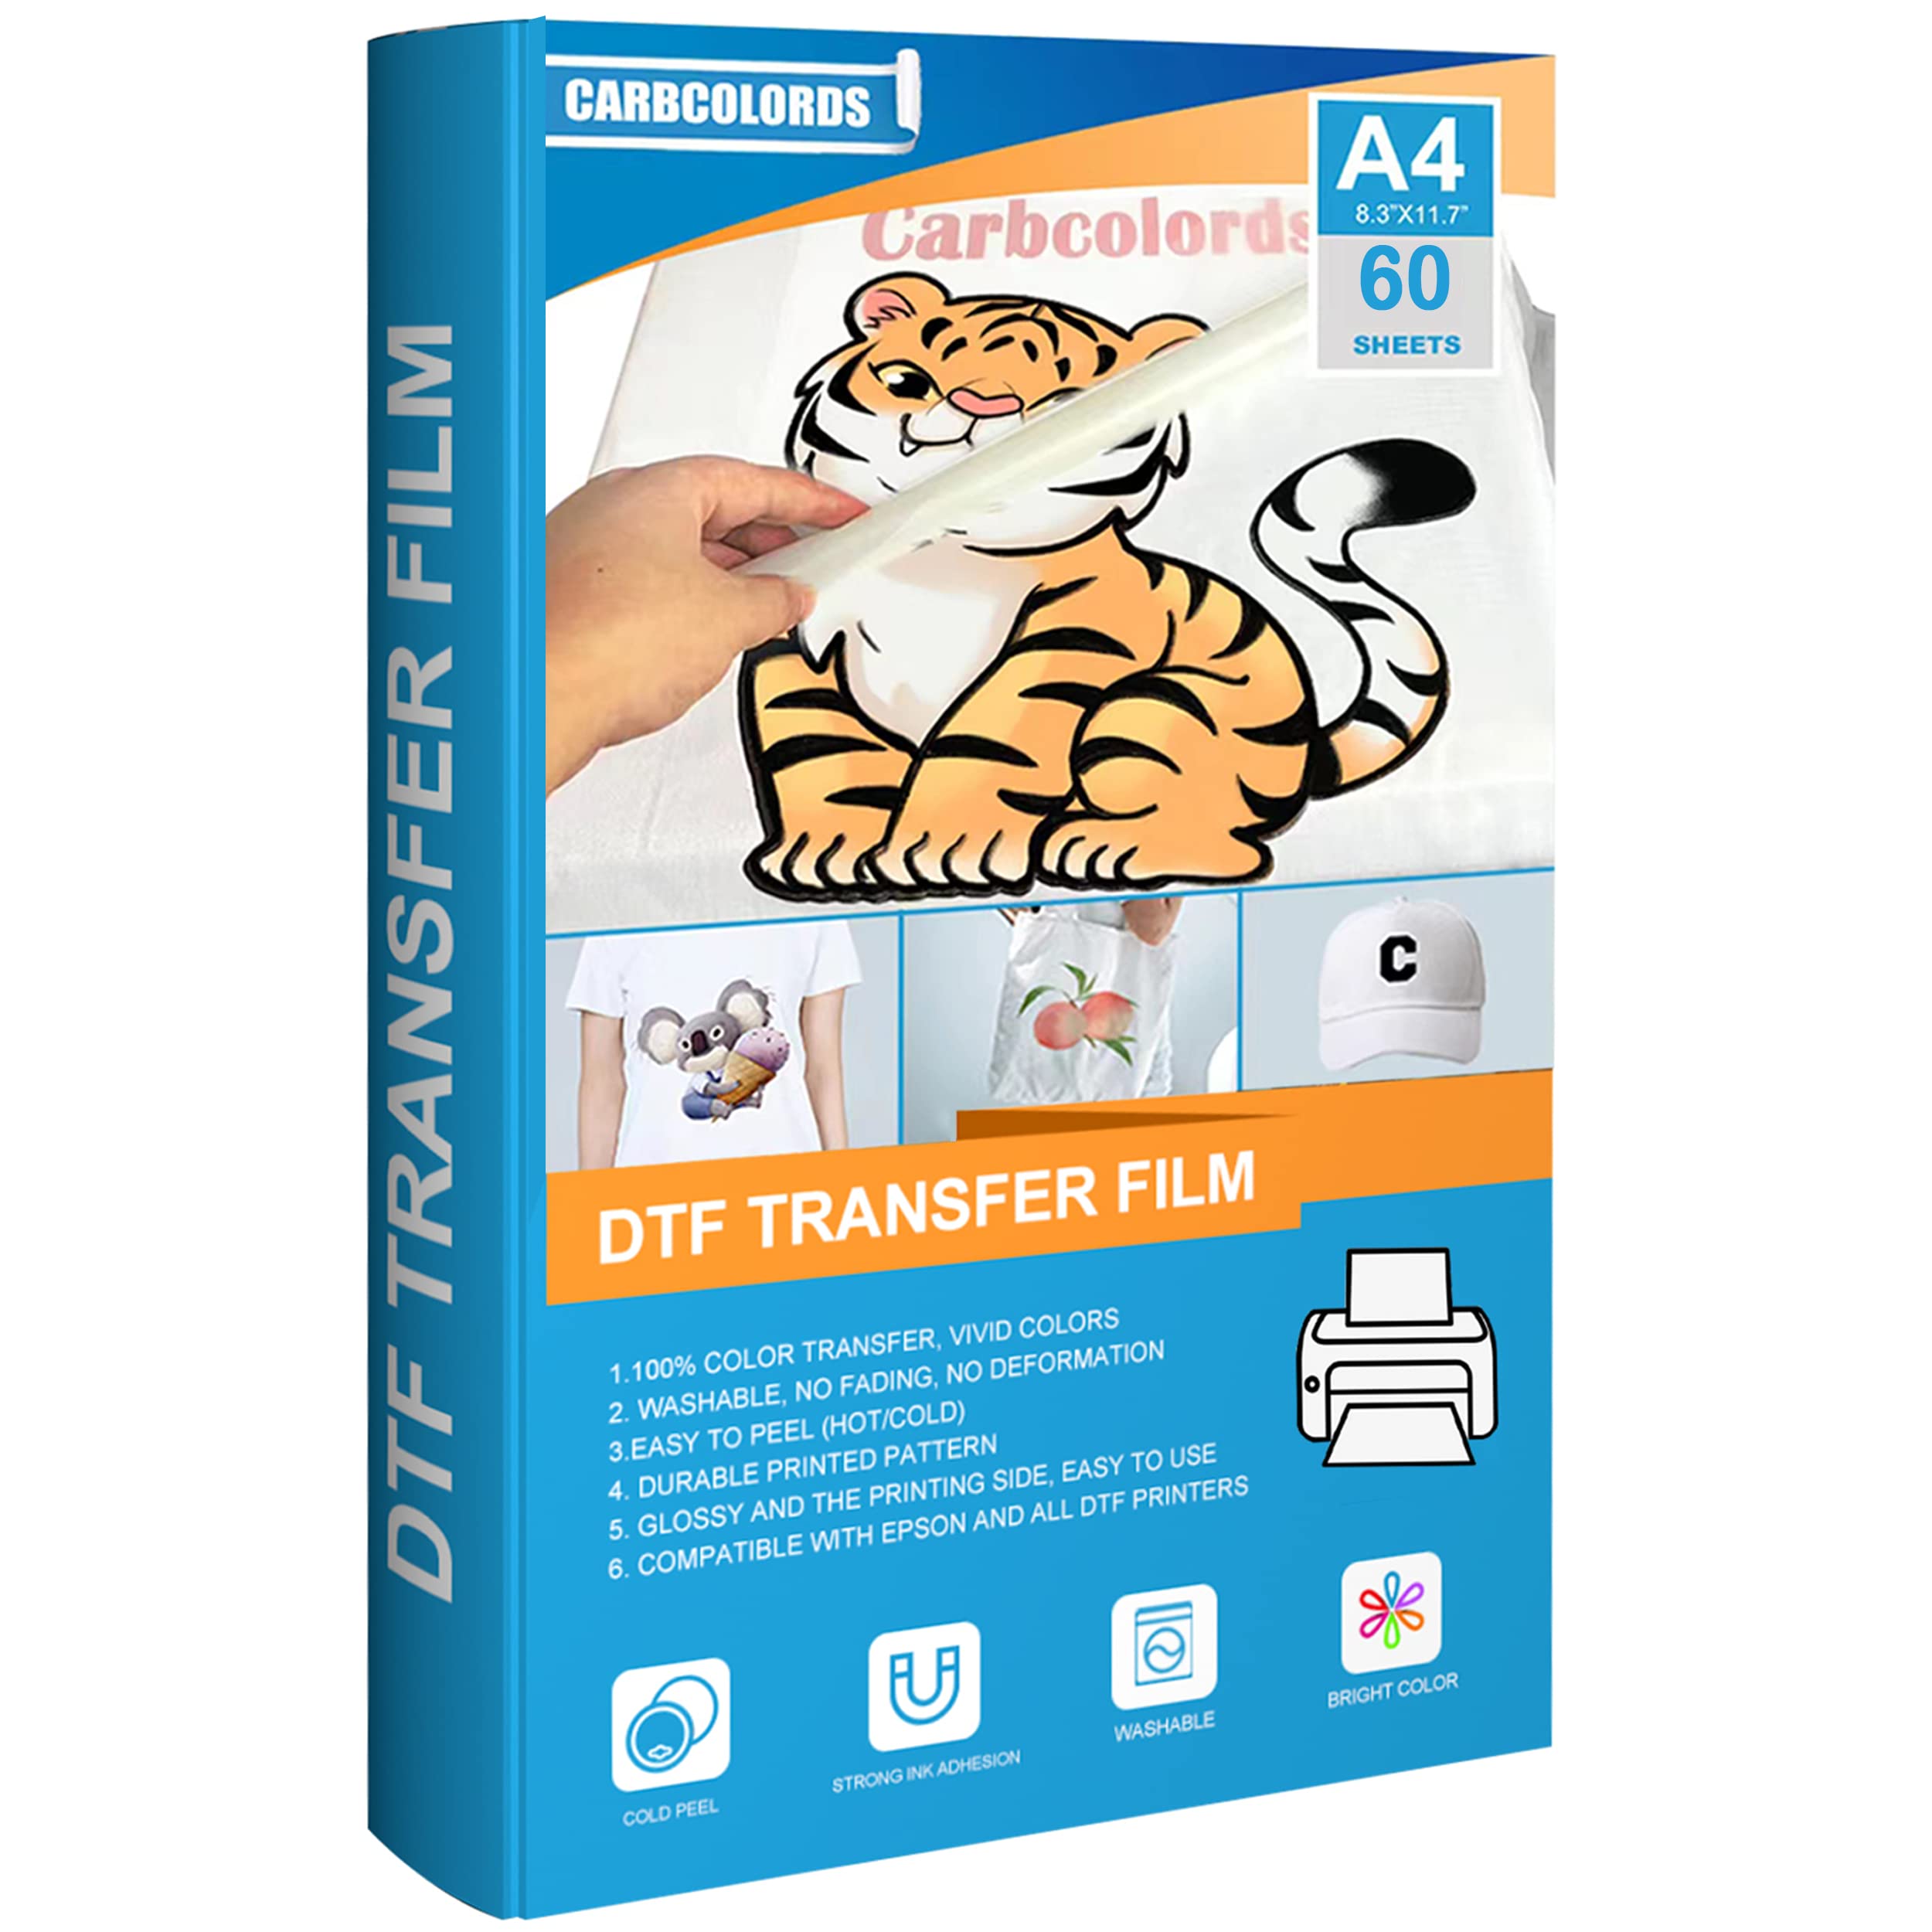 Carbcolords DTF Transfer Film-60 Sheets A4(8.3 x 11.7) PET Clear PreTreat  Heat Transfer Paper for DYI Direct on T-Shirts Textile A4(60 PCS)